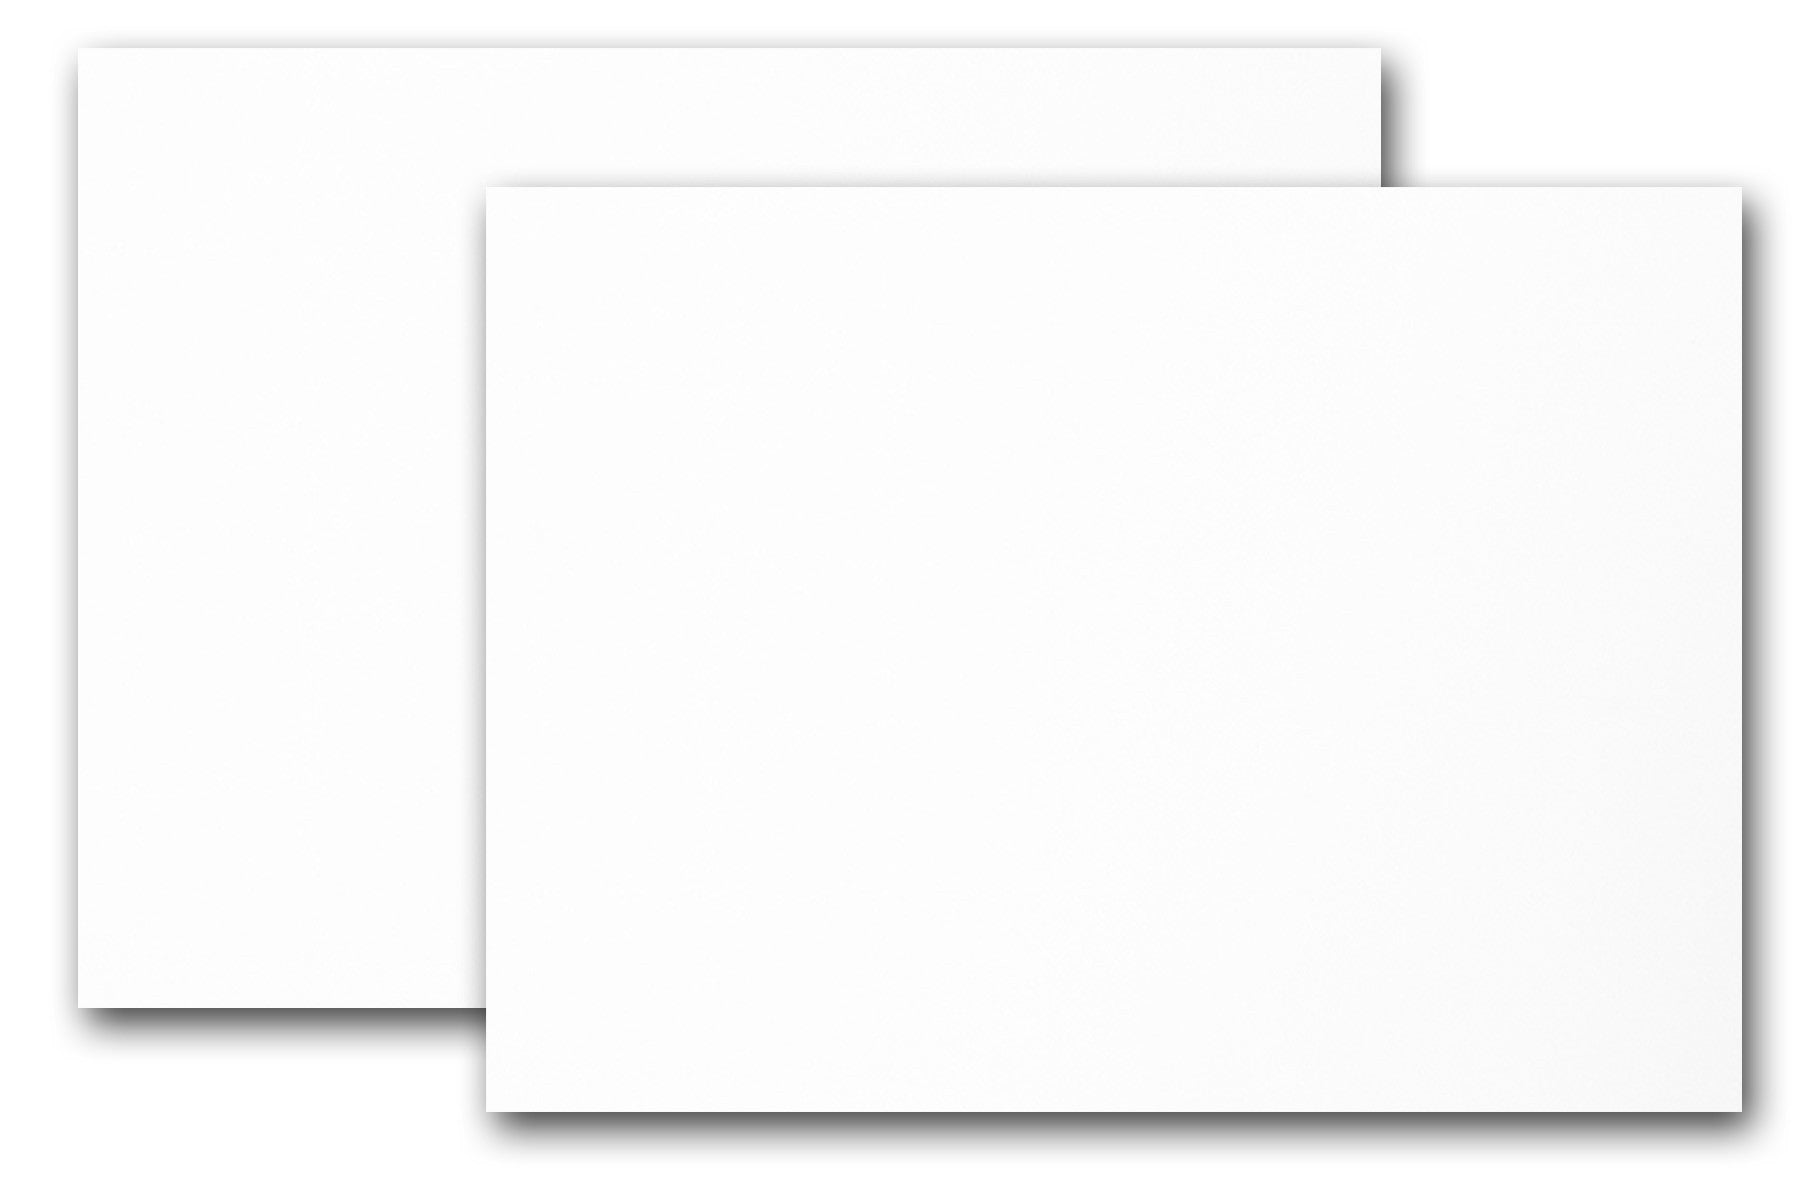 4 1/4 x 5 1/2 Extra Thick Blank White Cards with Envelopes - 40 Set Pack  - Thick 100lb Cover Paper Scored Folding Cardstock for Card Making